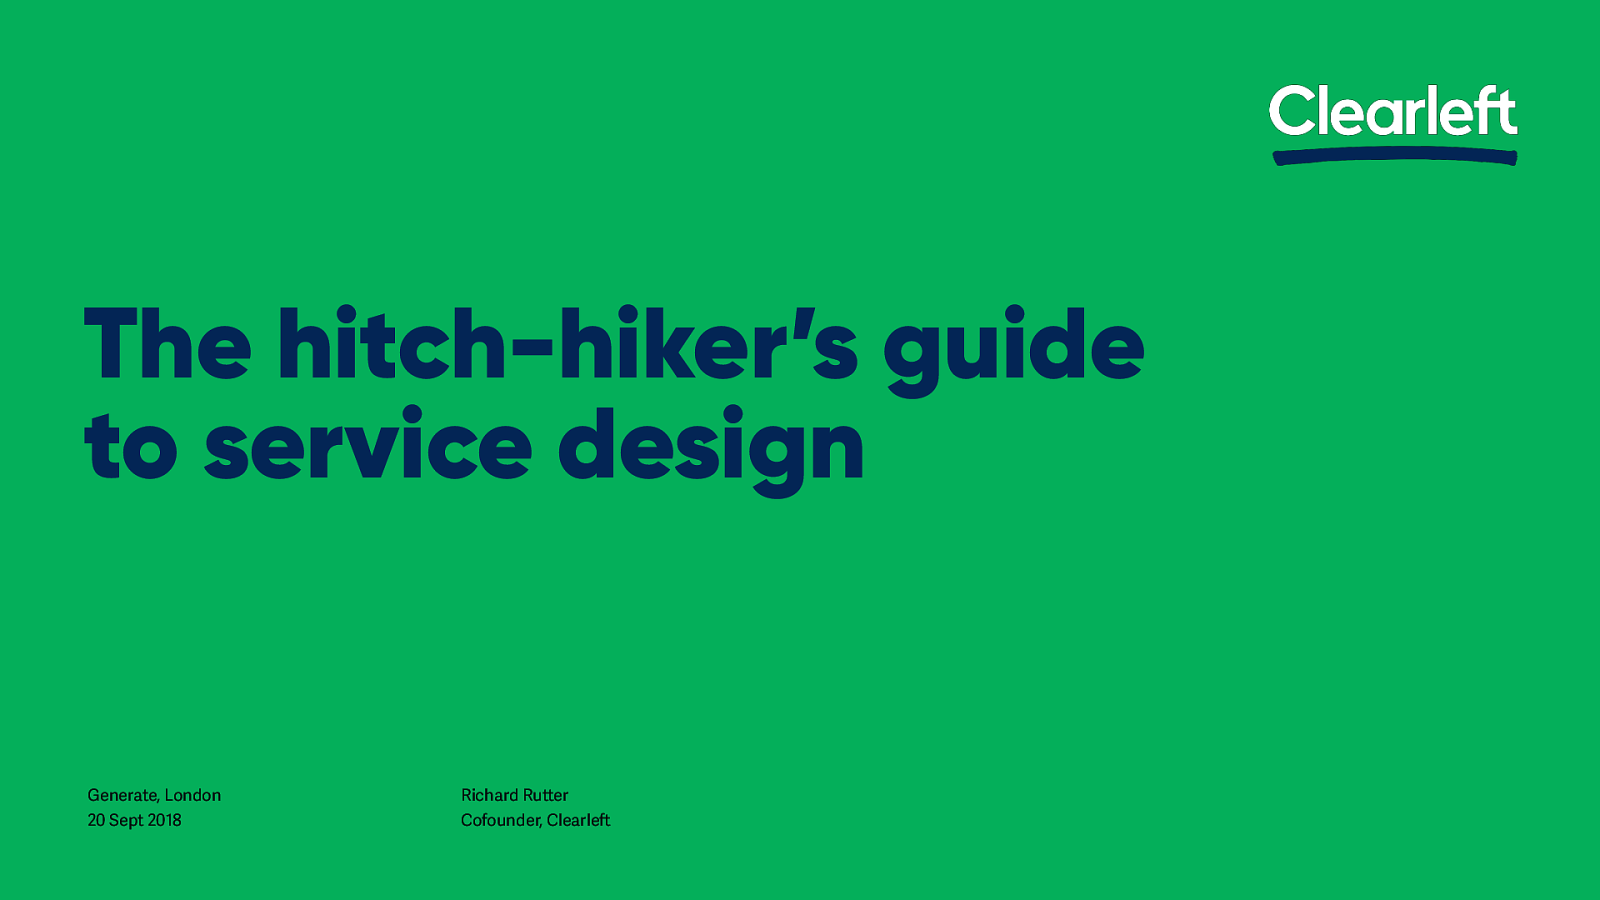 A hitch-hiker's guide to service design